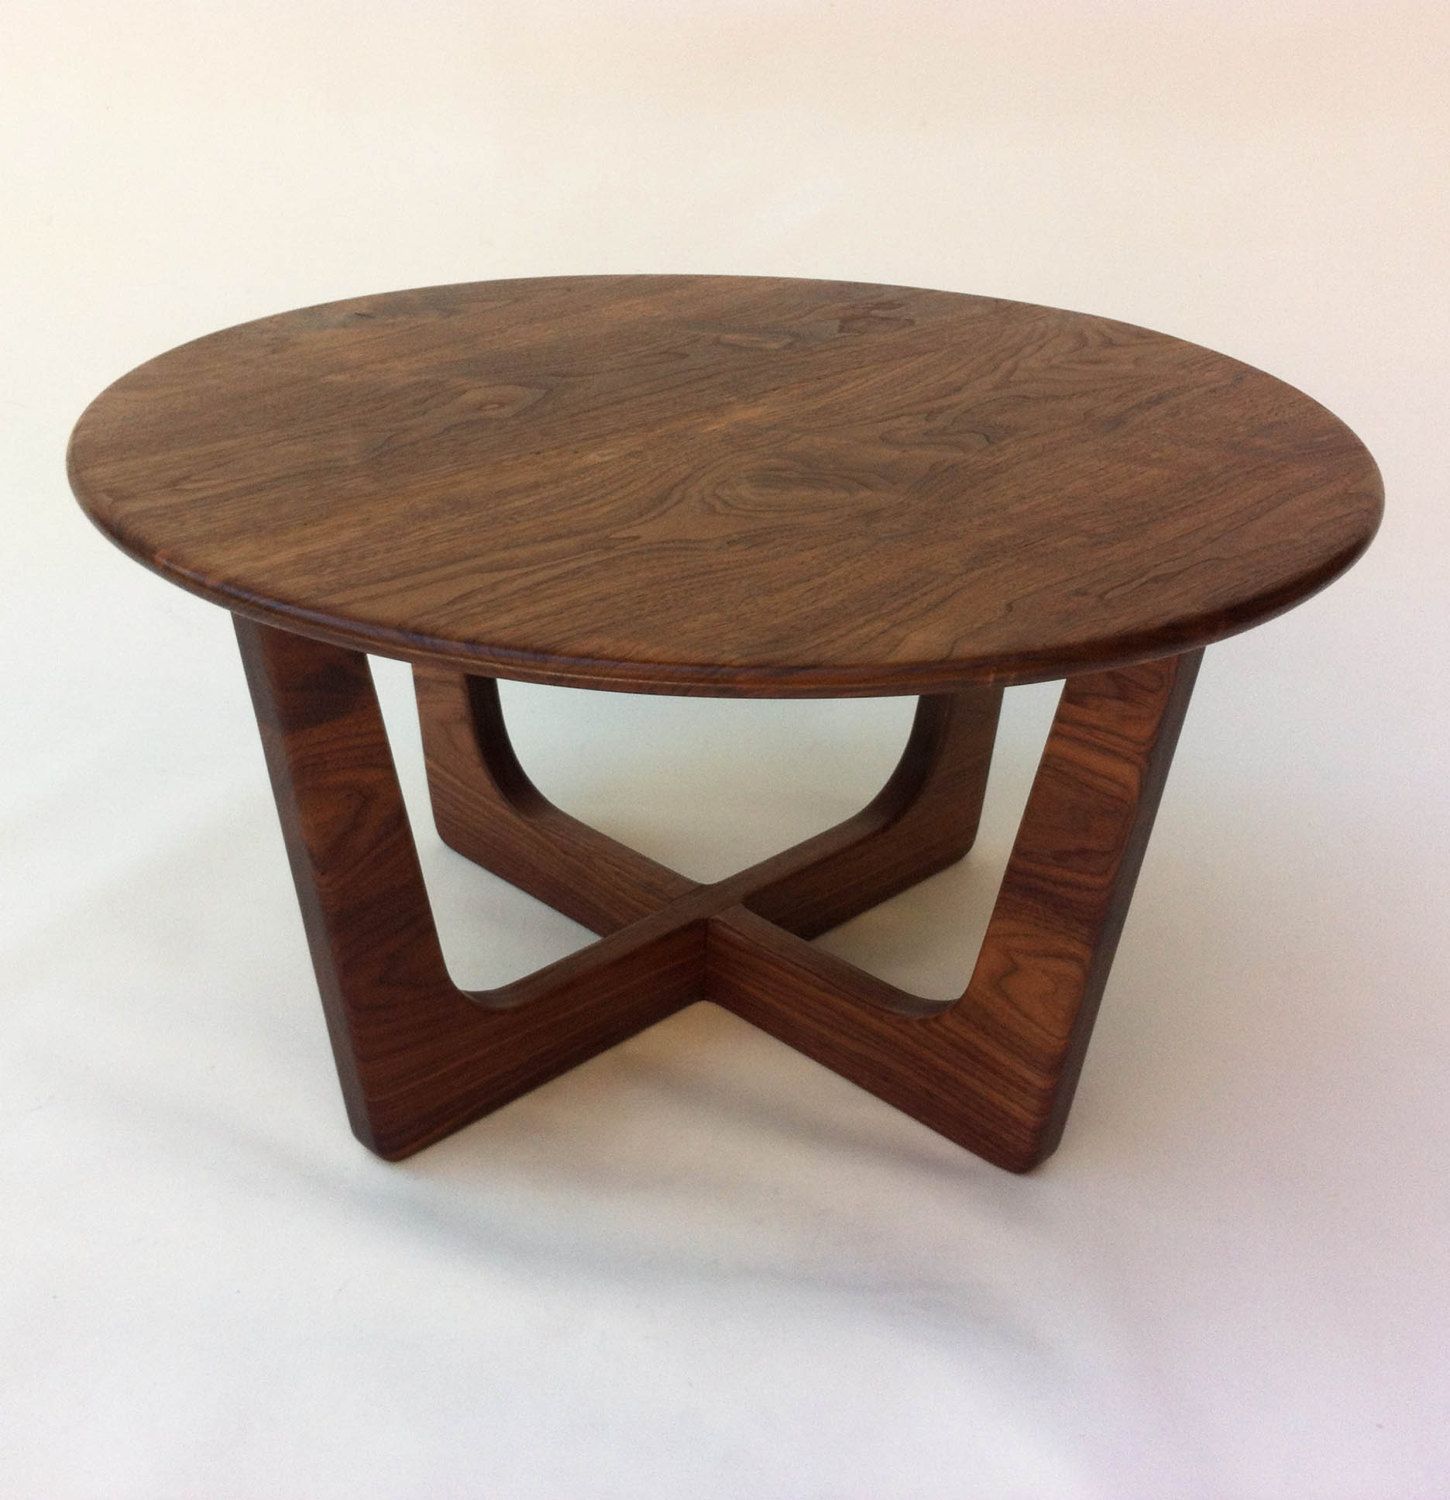 Mid Century Modern Round Wood Coffee Table Inside Coffee Tables With Solid Legs (View 13 of 15)